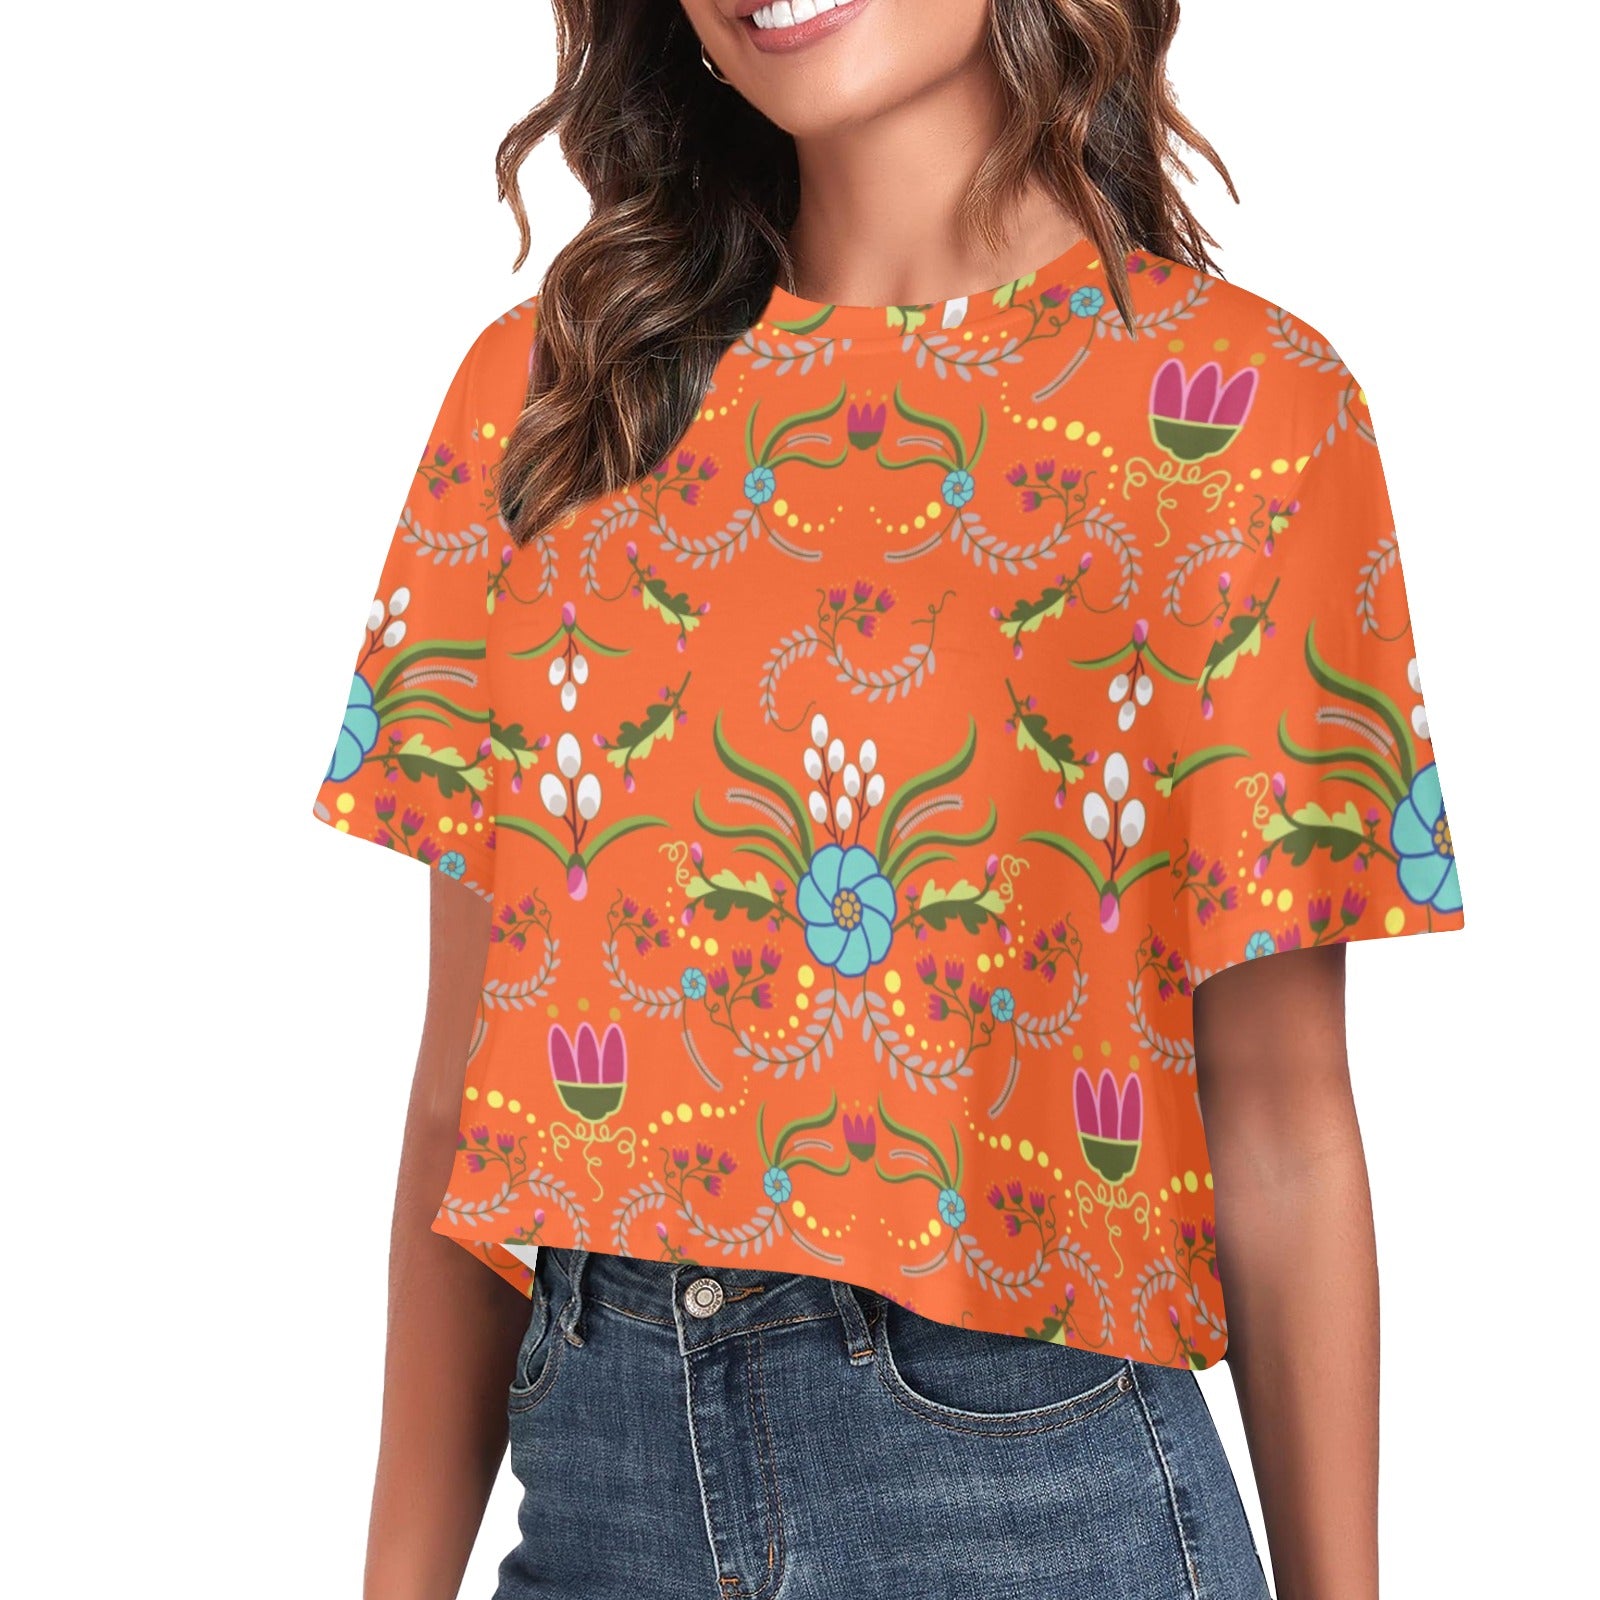 First Bloom Carrots Women's Cropped T-shirt